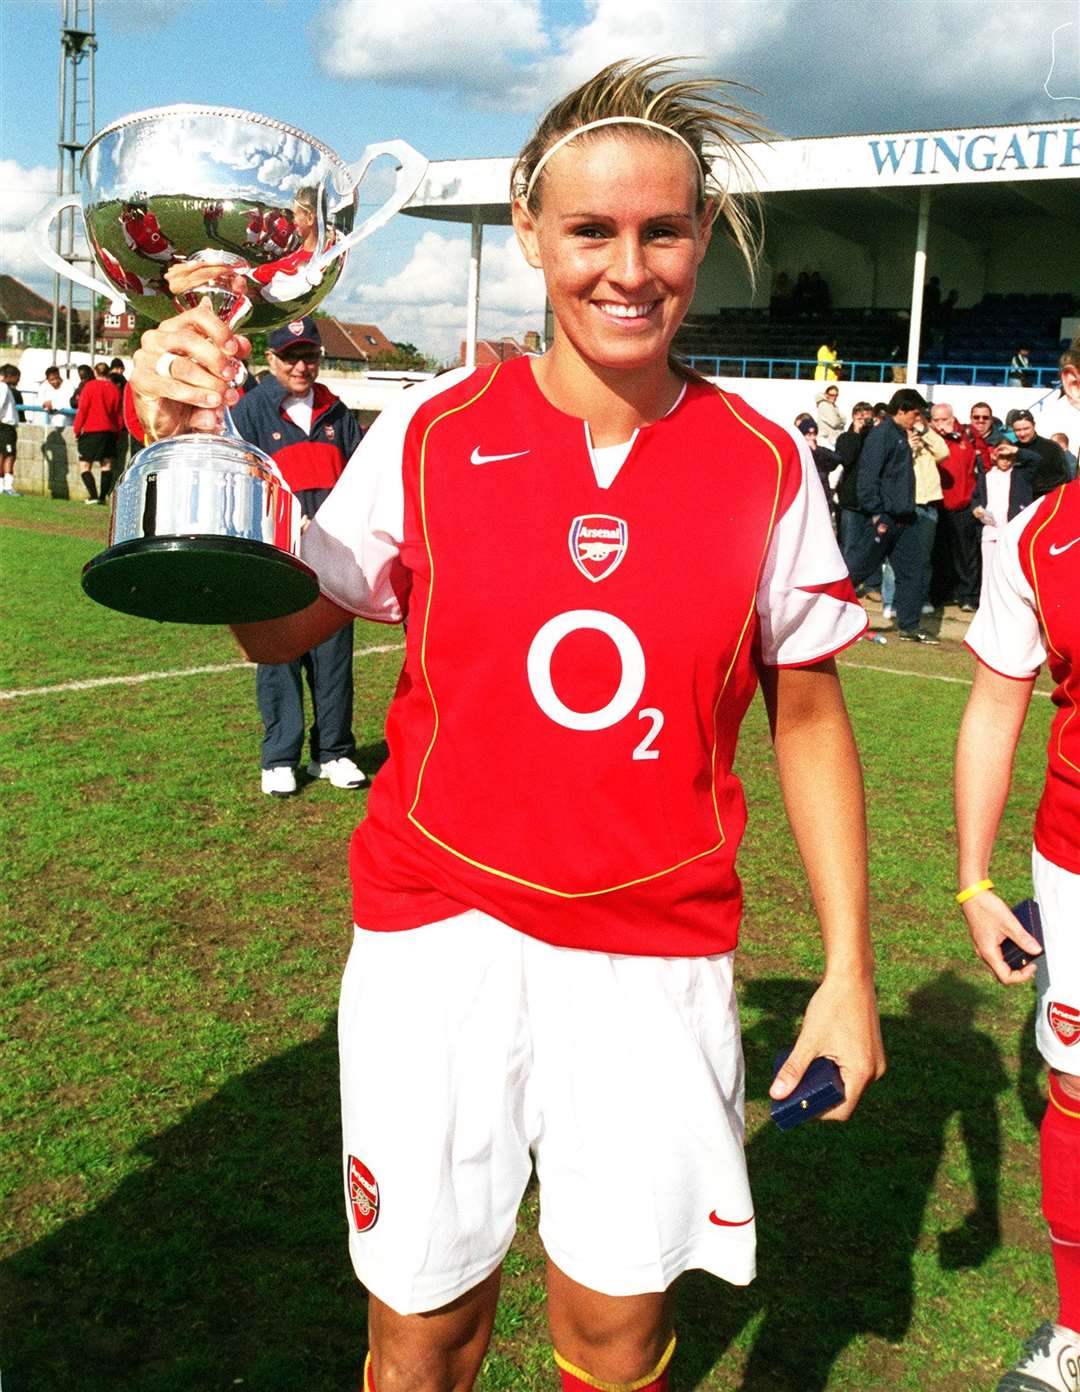 Feeling just champion after clinching the Women's Premier League with Arsenal. Picture: Arsenal Football Club/Stuart MacFarlane.